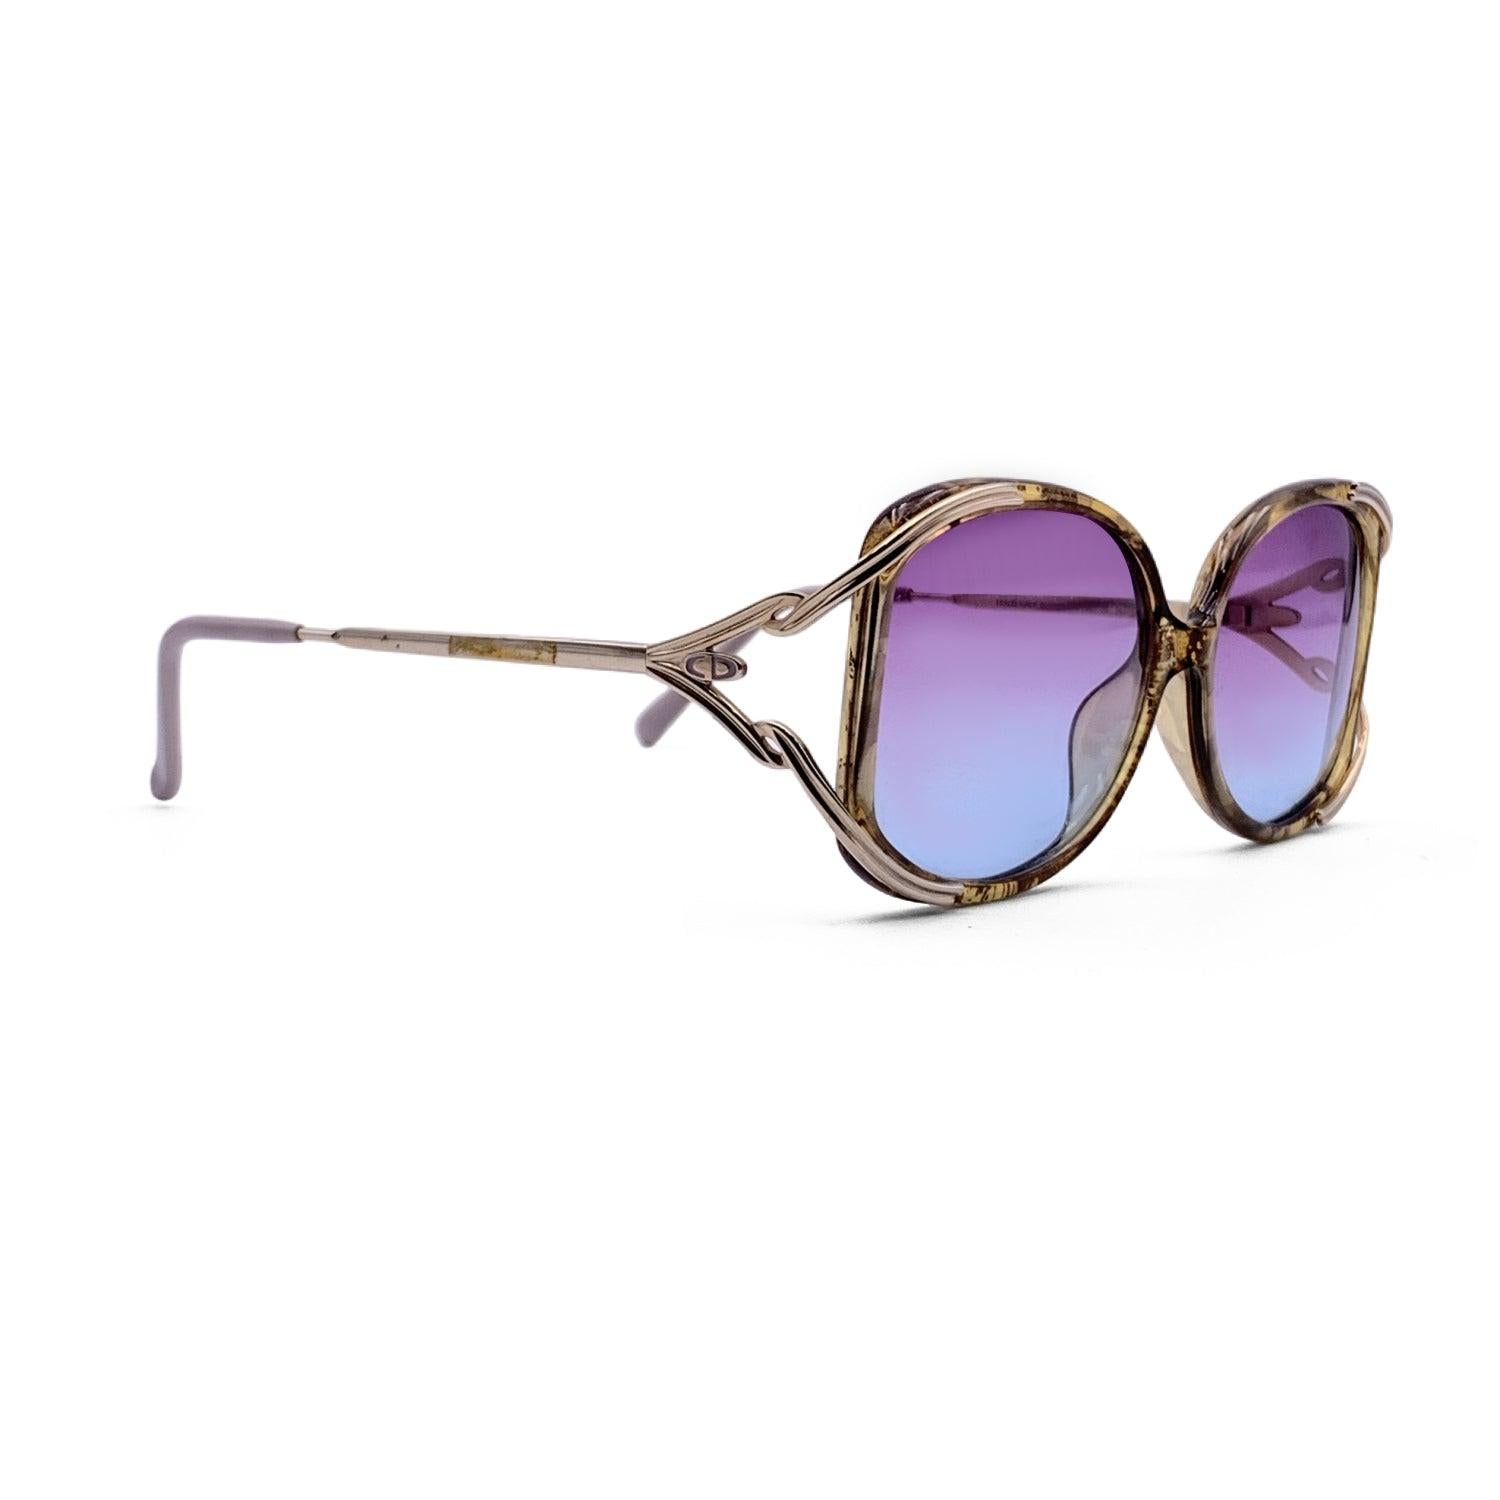 Christian Dior Vintage Women Sunglasses 2643 20 Optyl 54/13 115mm In Excellent Condition For Sale In Rome, Rome